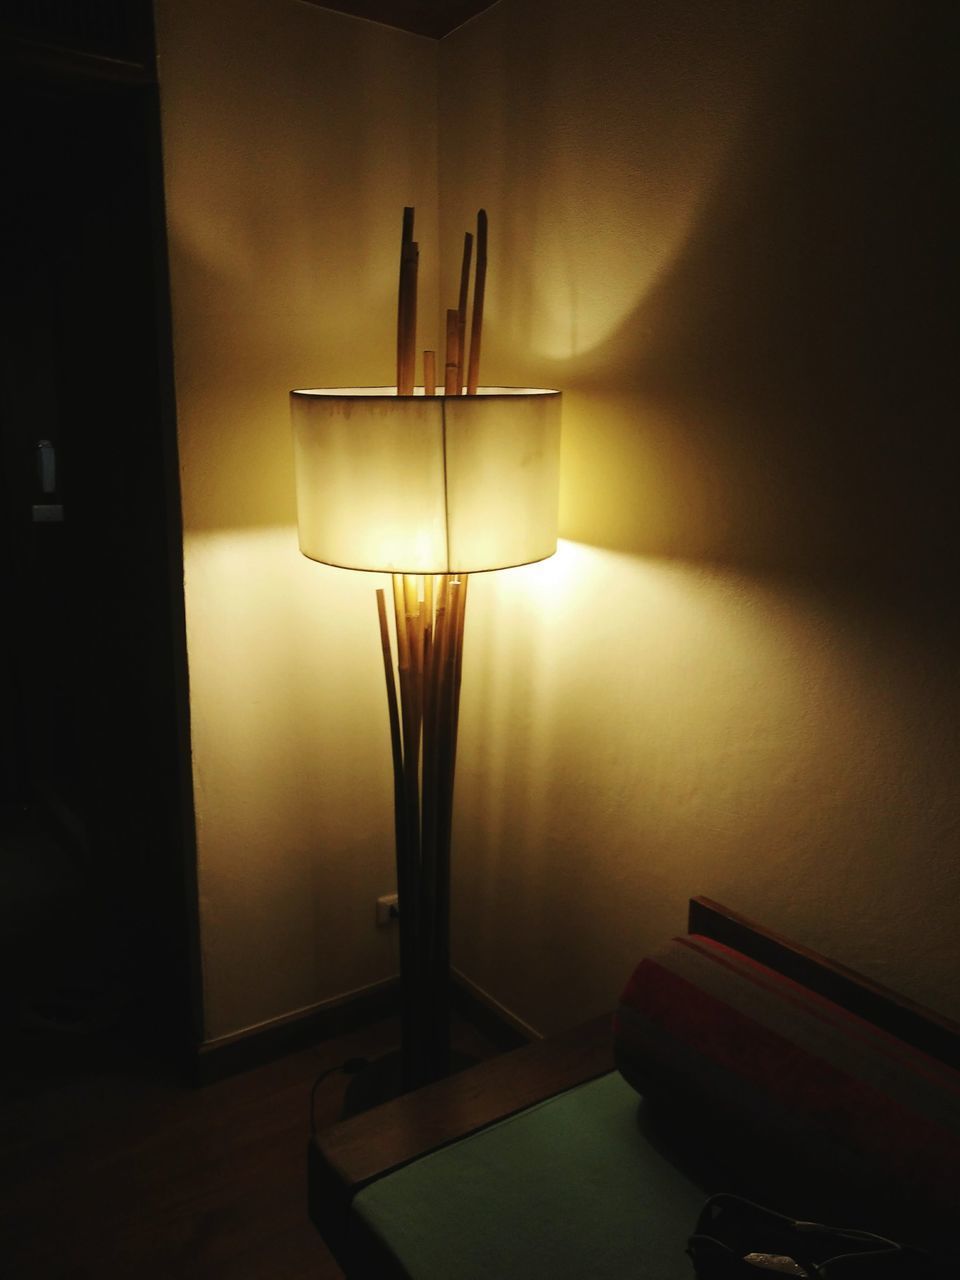 CLOSE-UP OF ILLUMINATED ELECTRIC LAMP ON TABLE